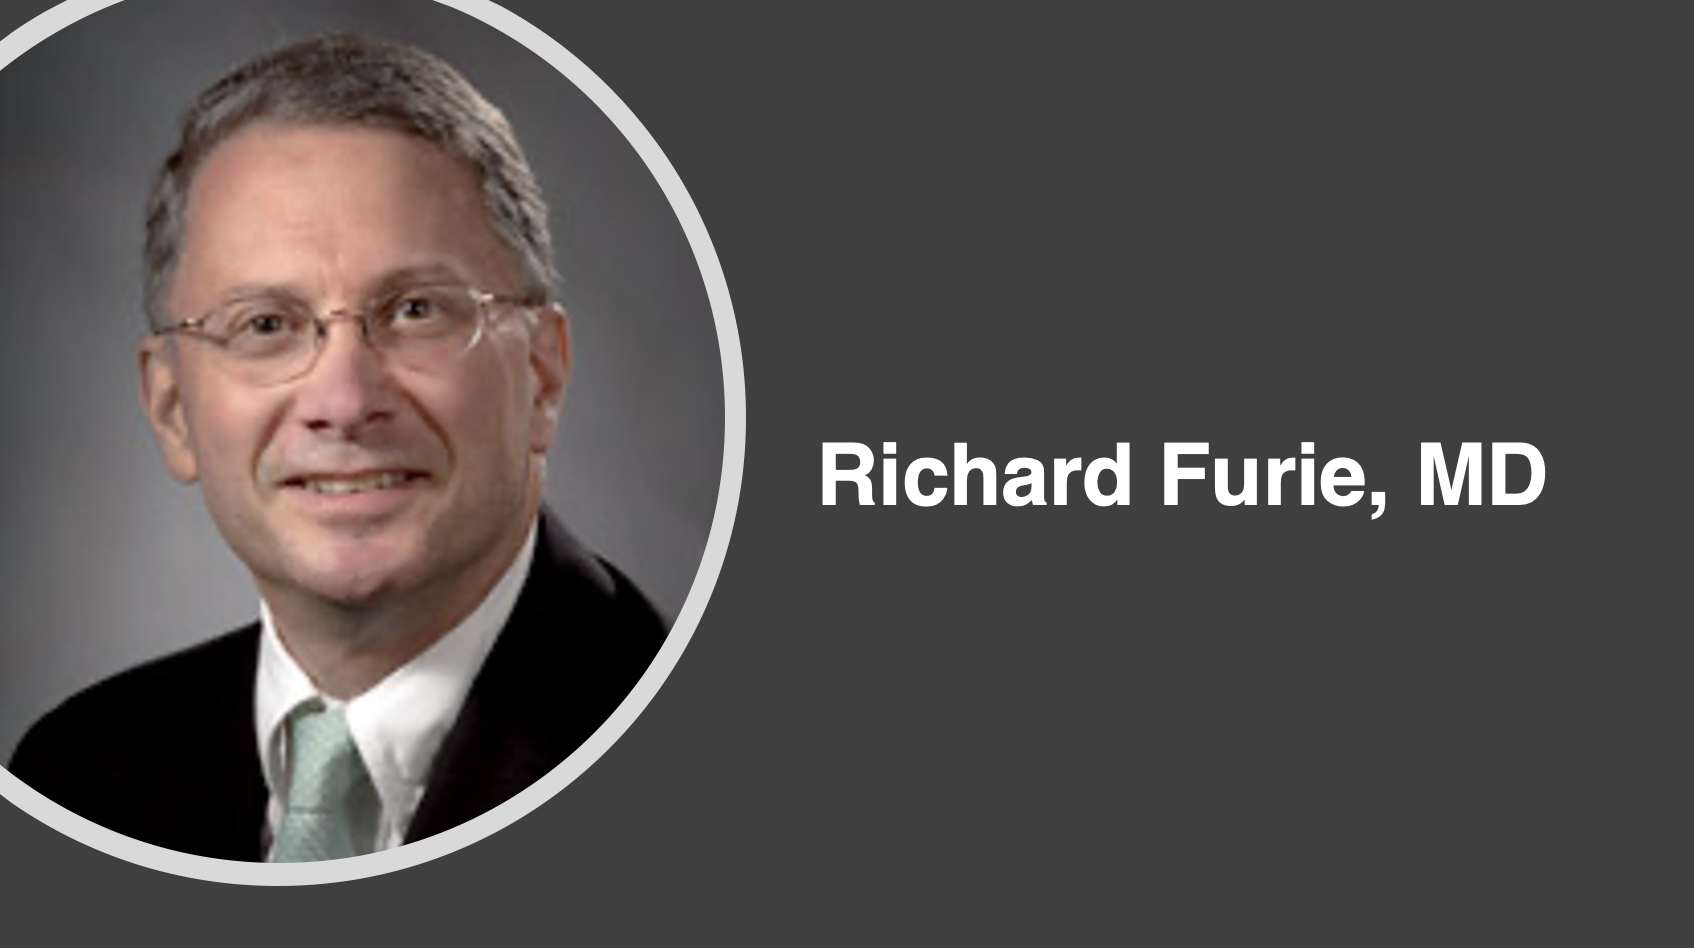 Richard Furie, MD: FDA Approval of Anifrolumab-Fnia for Systemic Lupus